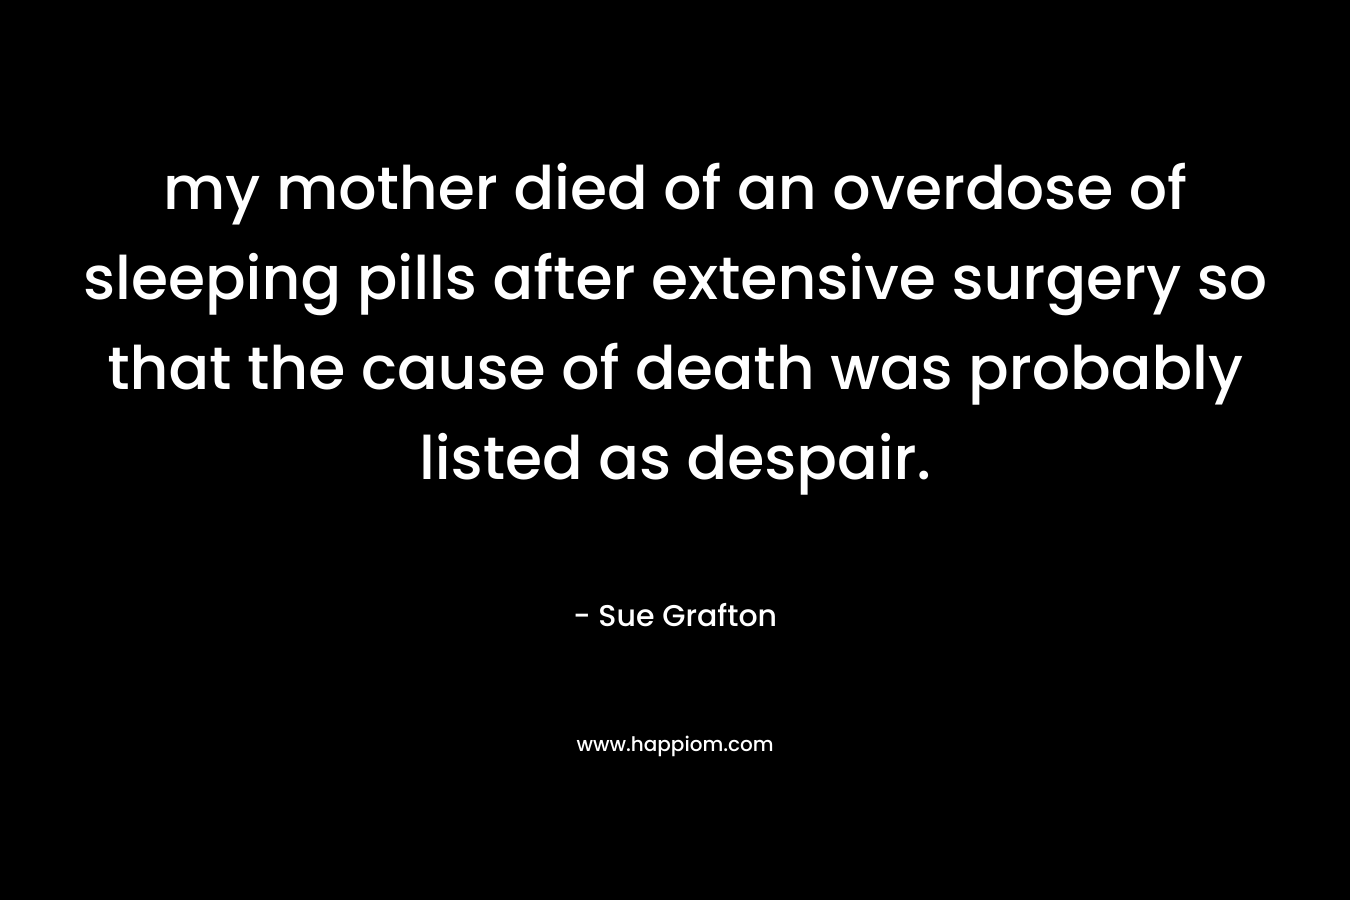 my mother died of an overdose of sleeping pills after extensive surgery so that the cause of death was probably listed as despair. – Sue Grafton